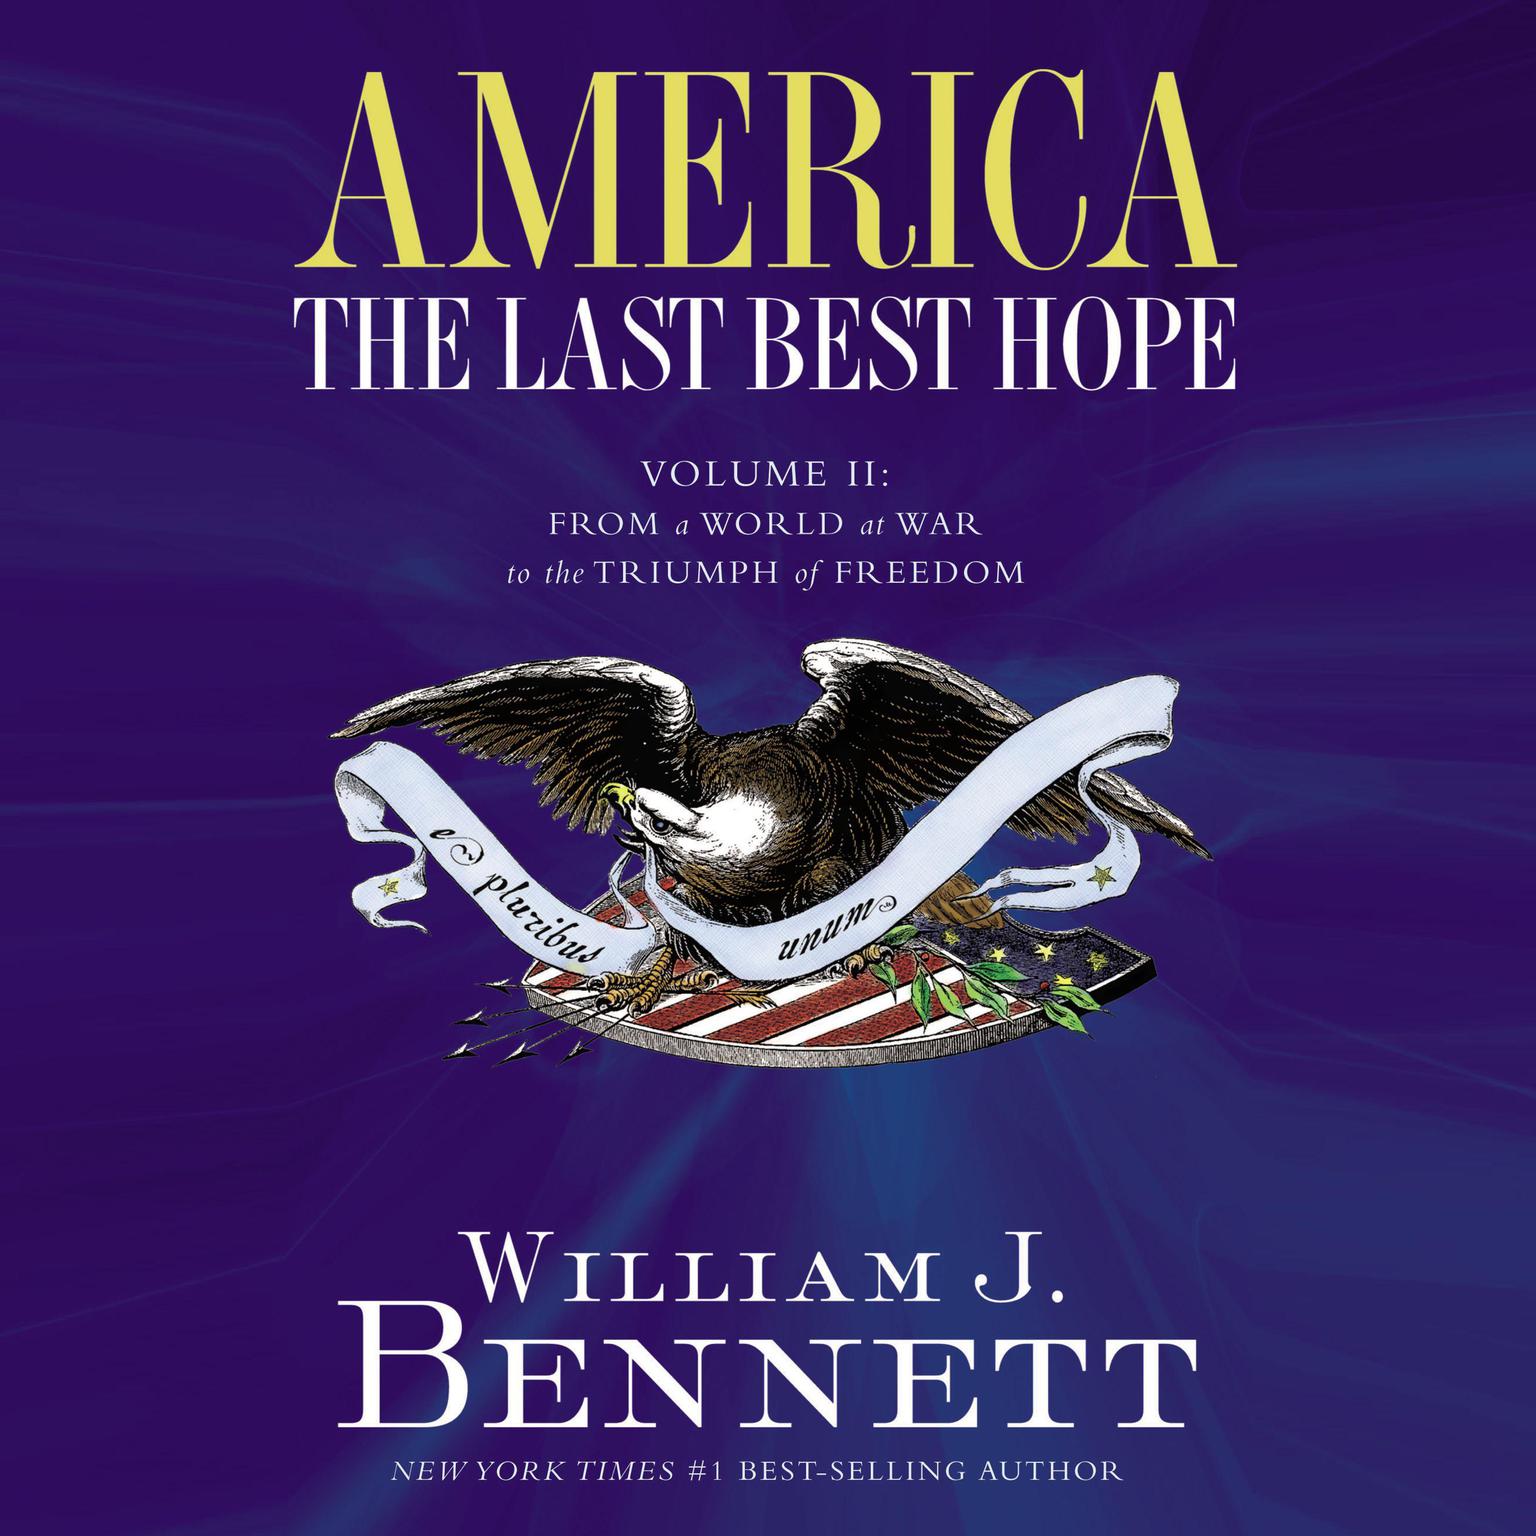 America: The Last Best Hope (Volume II): From a World at War to the Triumph of Freedom Audiobook, by William J. Bennett